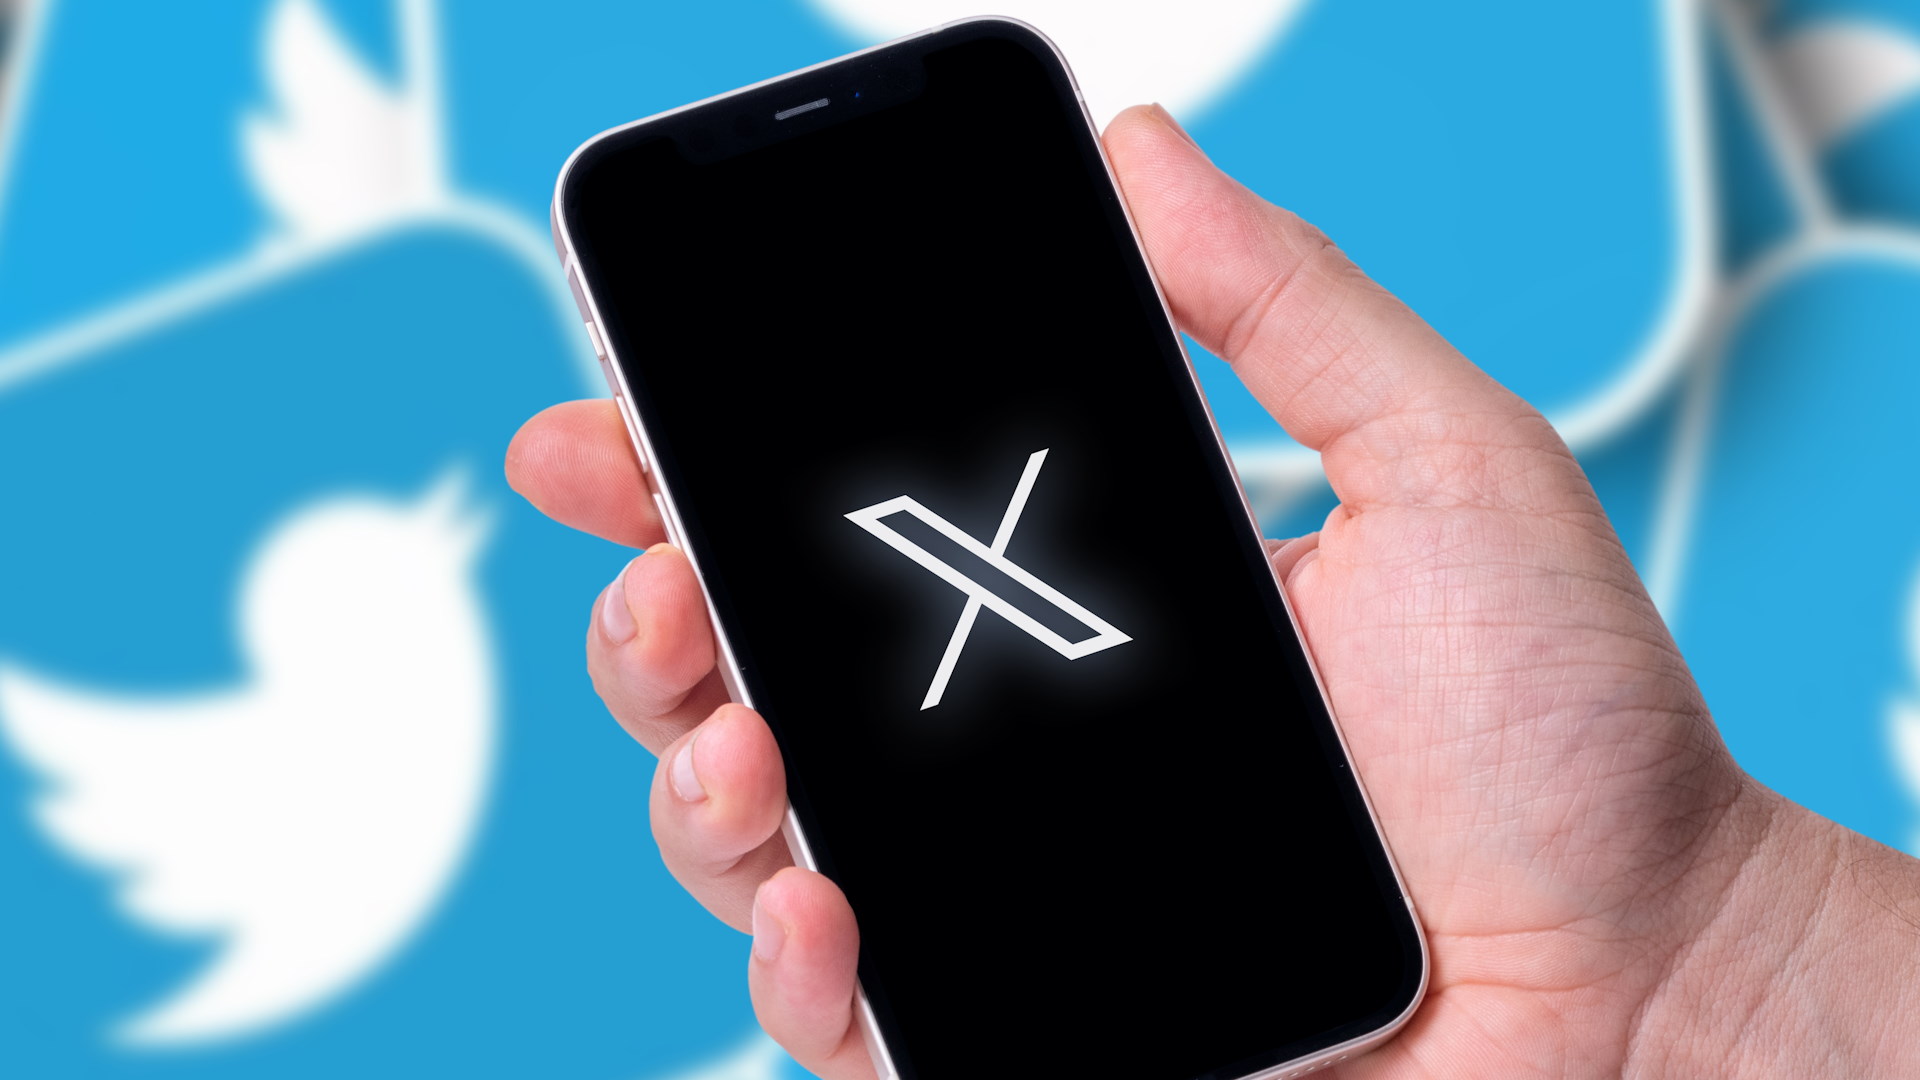 X – formerly Twitter is shutting down the Circles feature on October 31st